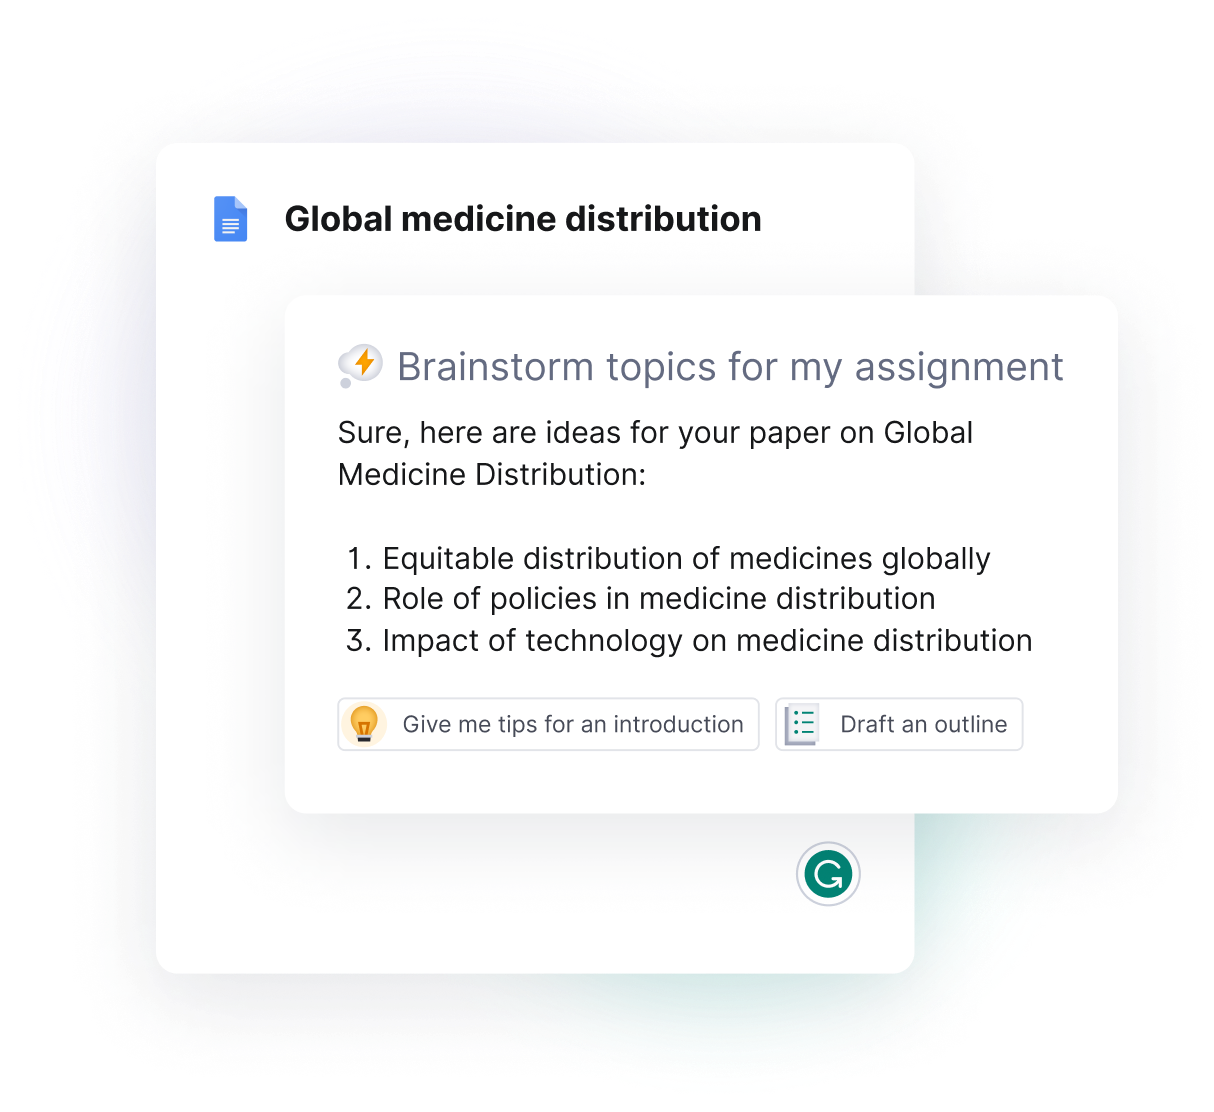 How to brainstorm topics using Grammarly